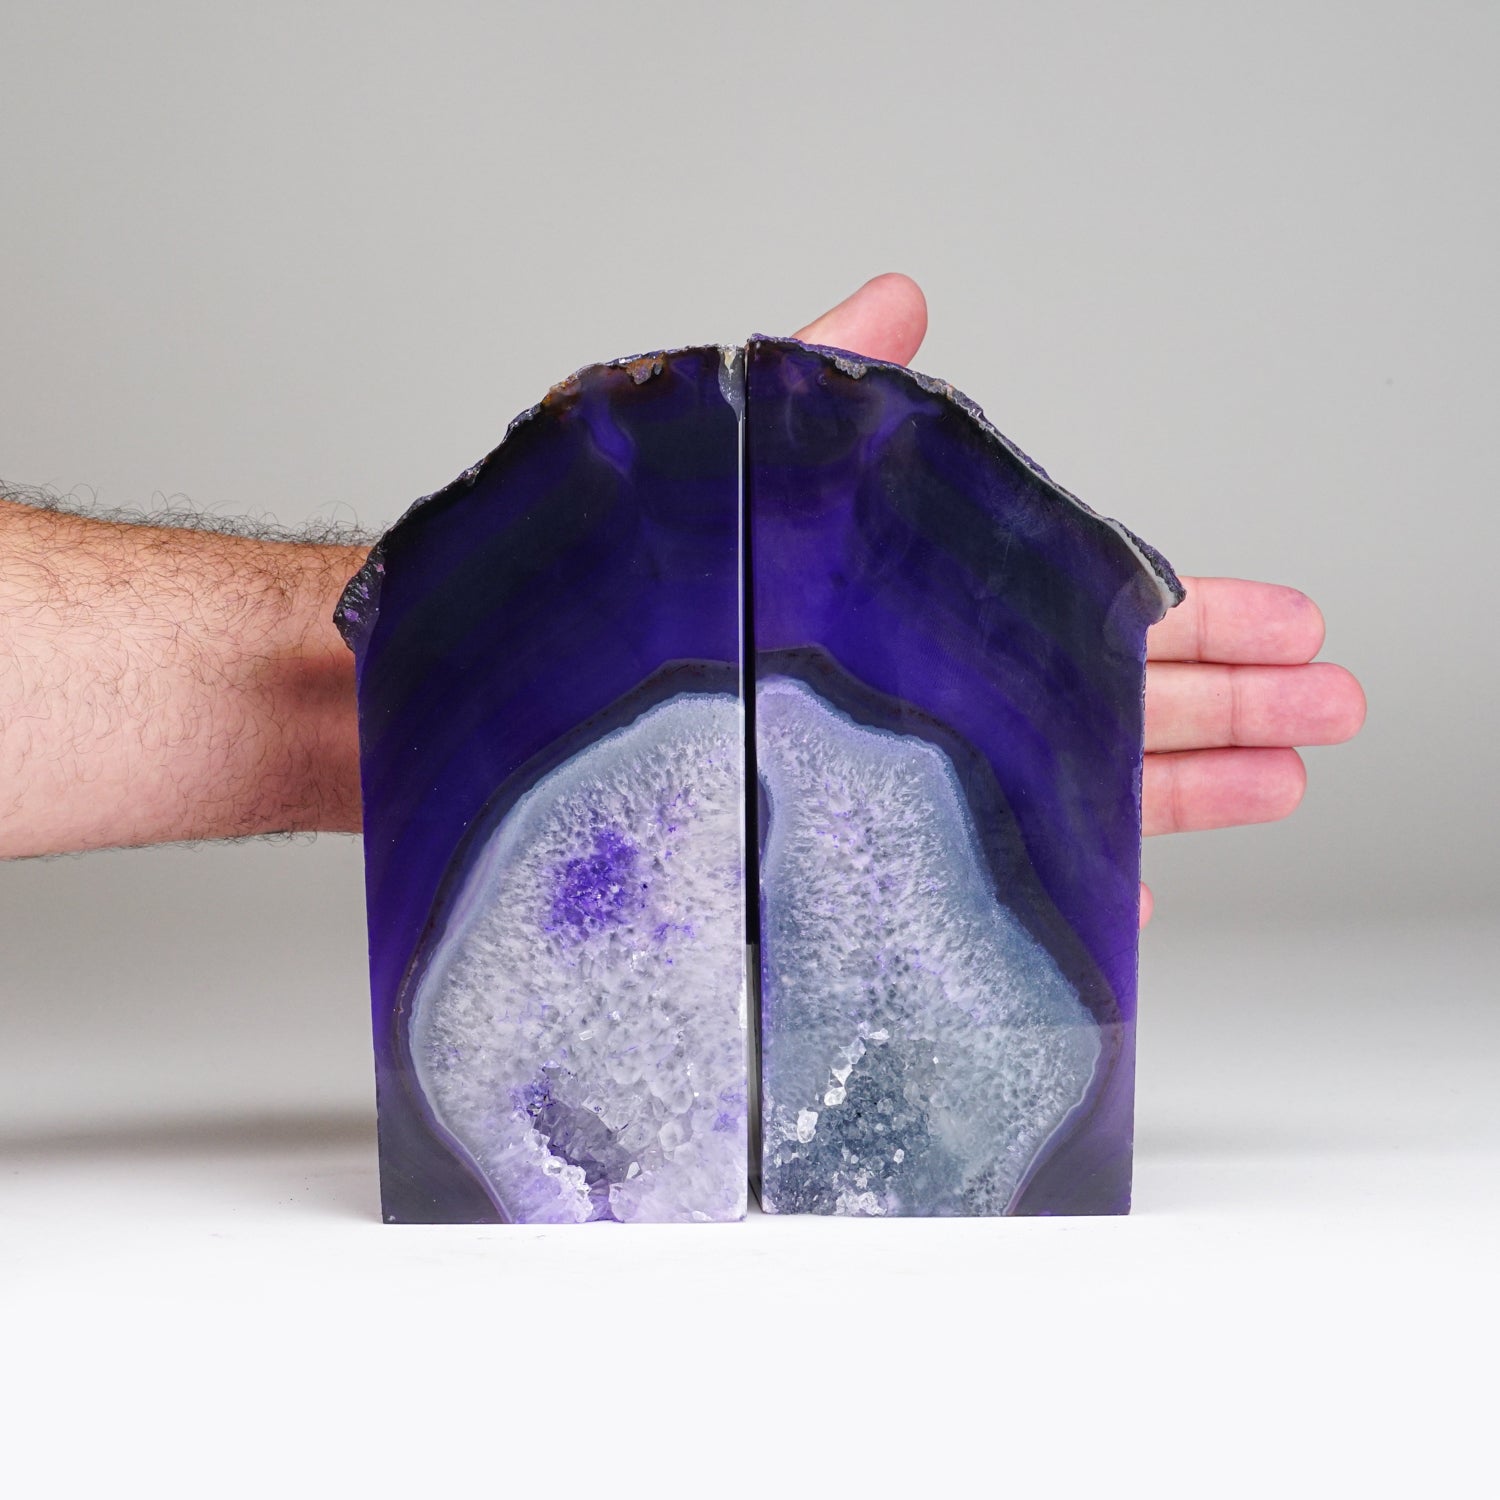 Genuine Purple Banded Agate Bookends from Brazil (7 lbs)